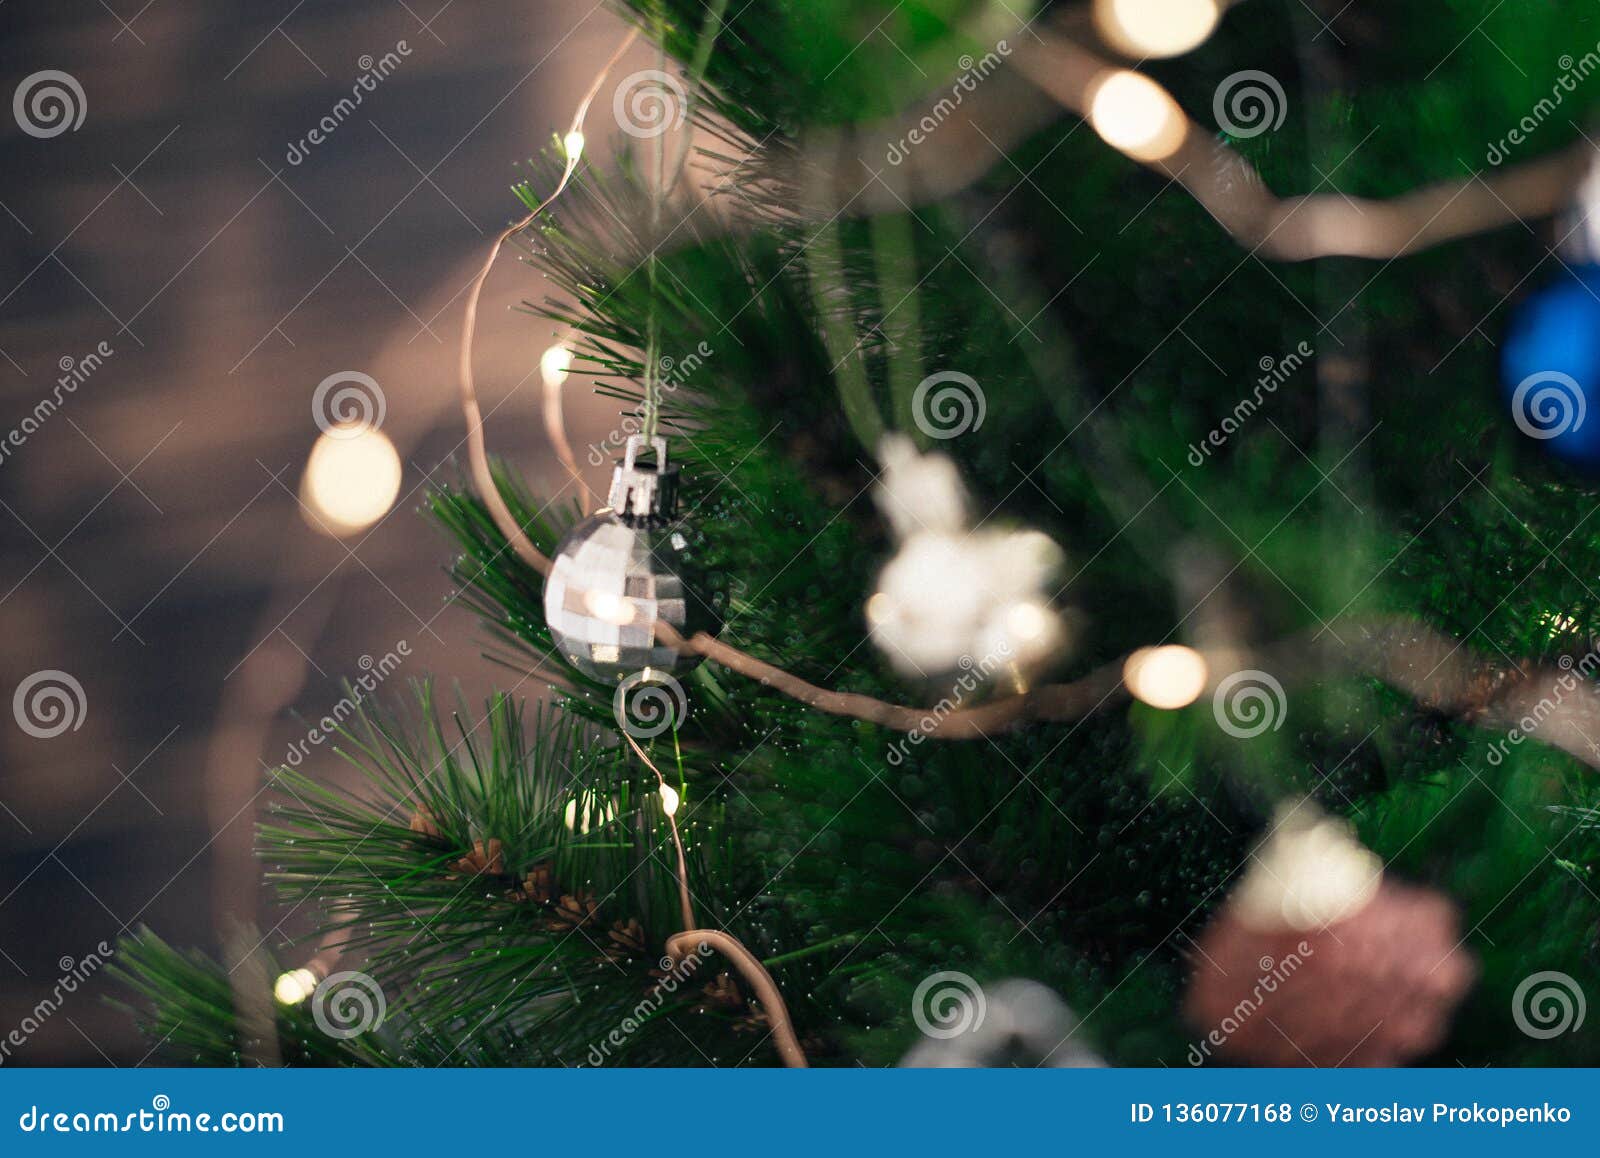 Christmas decorations on the tree with blurred background.